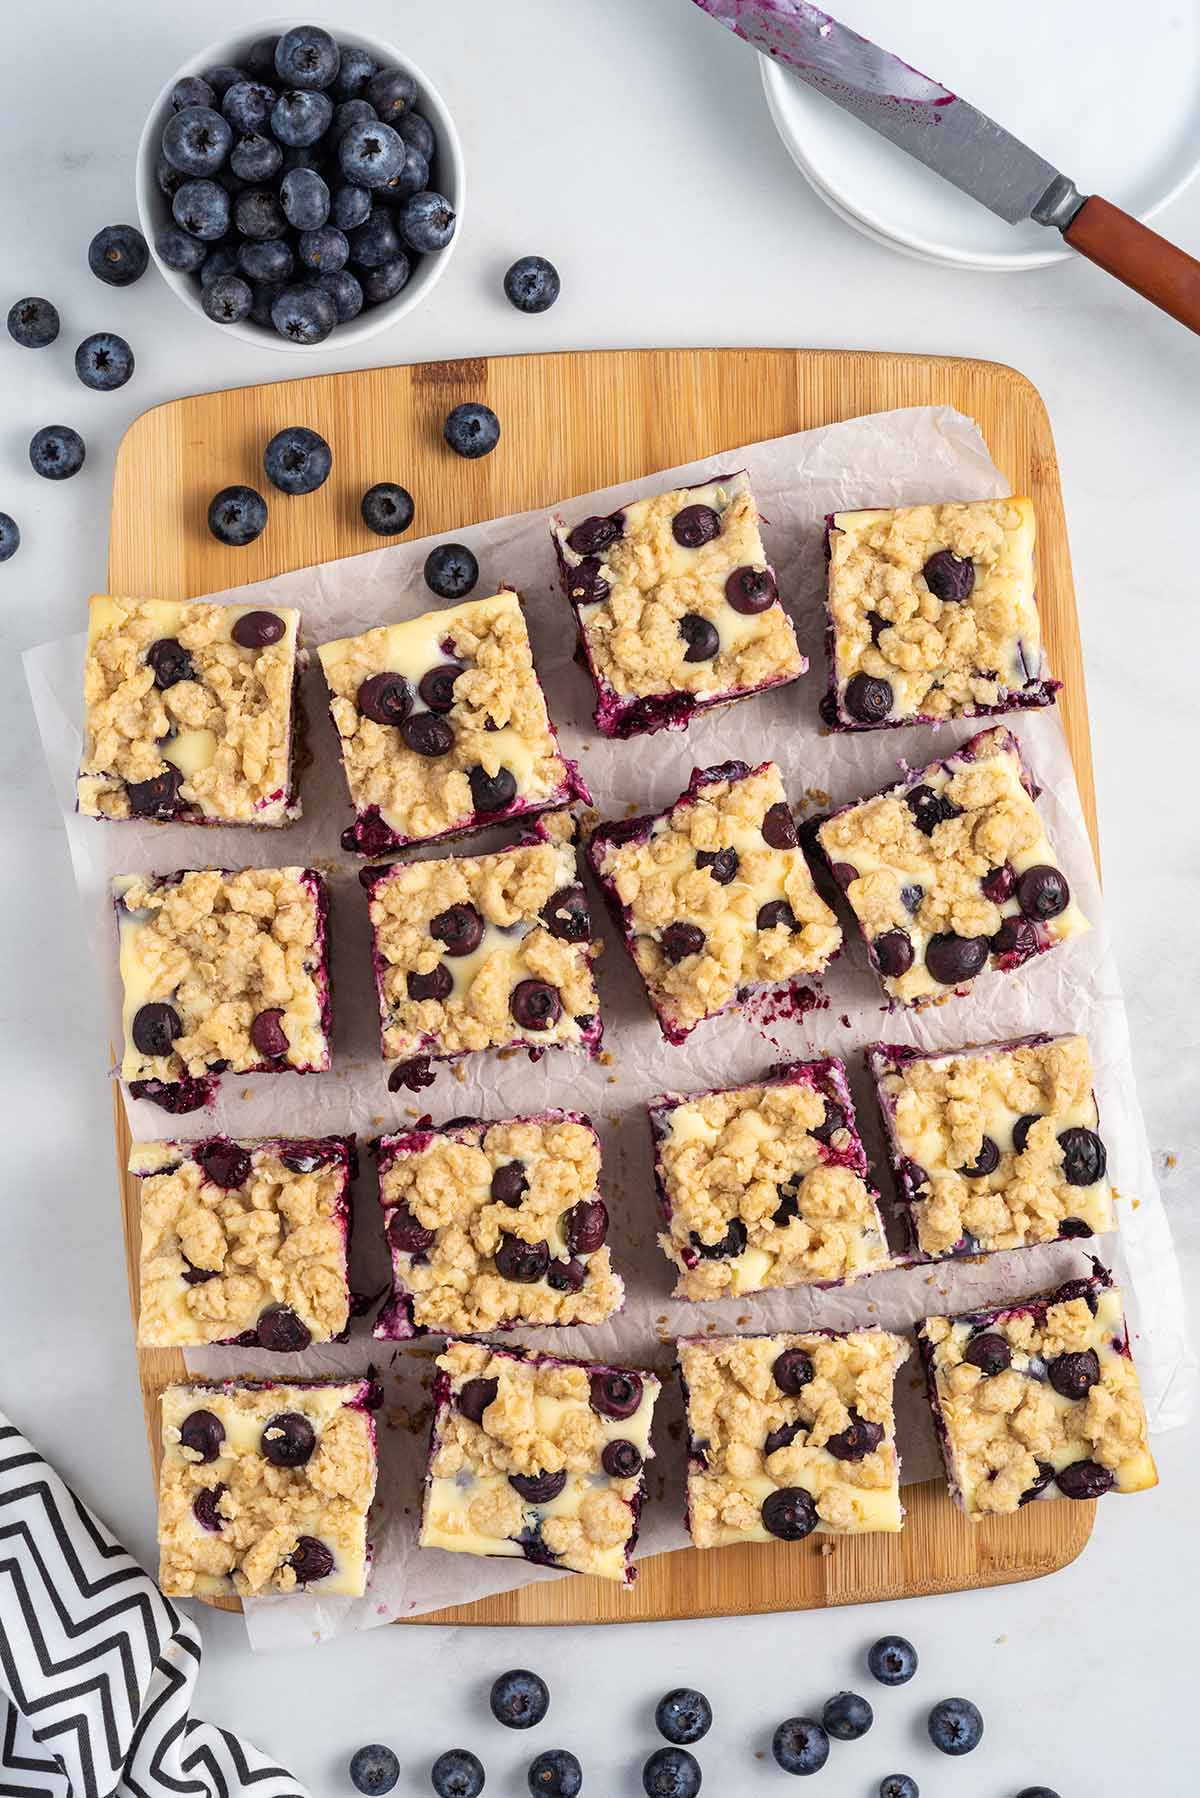 Blueberry Cheesecake Bars cut into squares